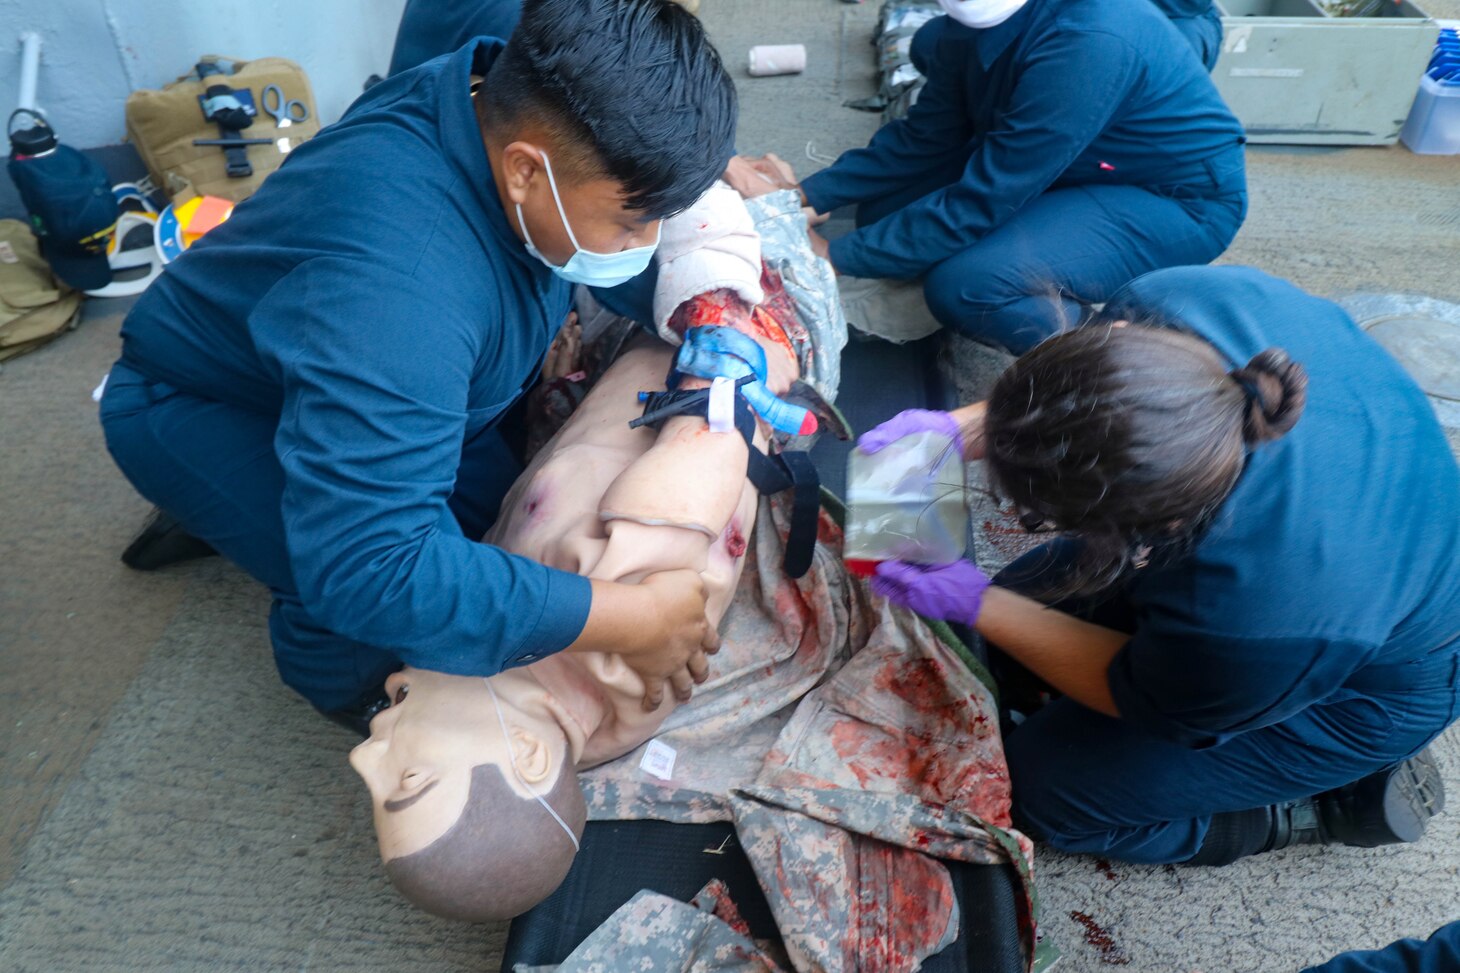 NAVAL STATION NORFOLK (Aug. 14, 2021) –Sailors provide medical aid to a crash dummy during a mass casualty drill aboard the dock landing ship USS Whidbey Island (LSD 41), the lead ship of its class of the same name, in support of Large Scale Exercise (LSE) 2021. LSE 2021 demonstrates the Navy's ability to employ precise, lethal, and overwhelming force globally across three naval component commands, five numbered fleets, and 17 time zones. (U.S. Navy photo by Ens. Drew Hendricks)